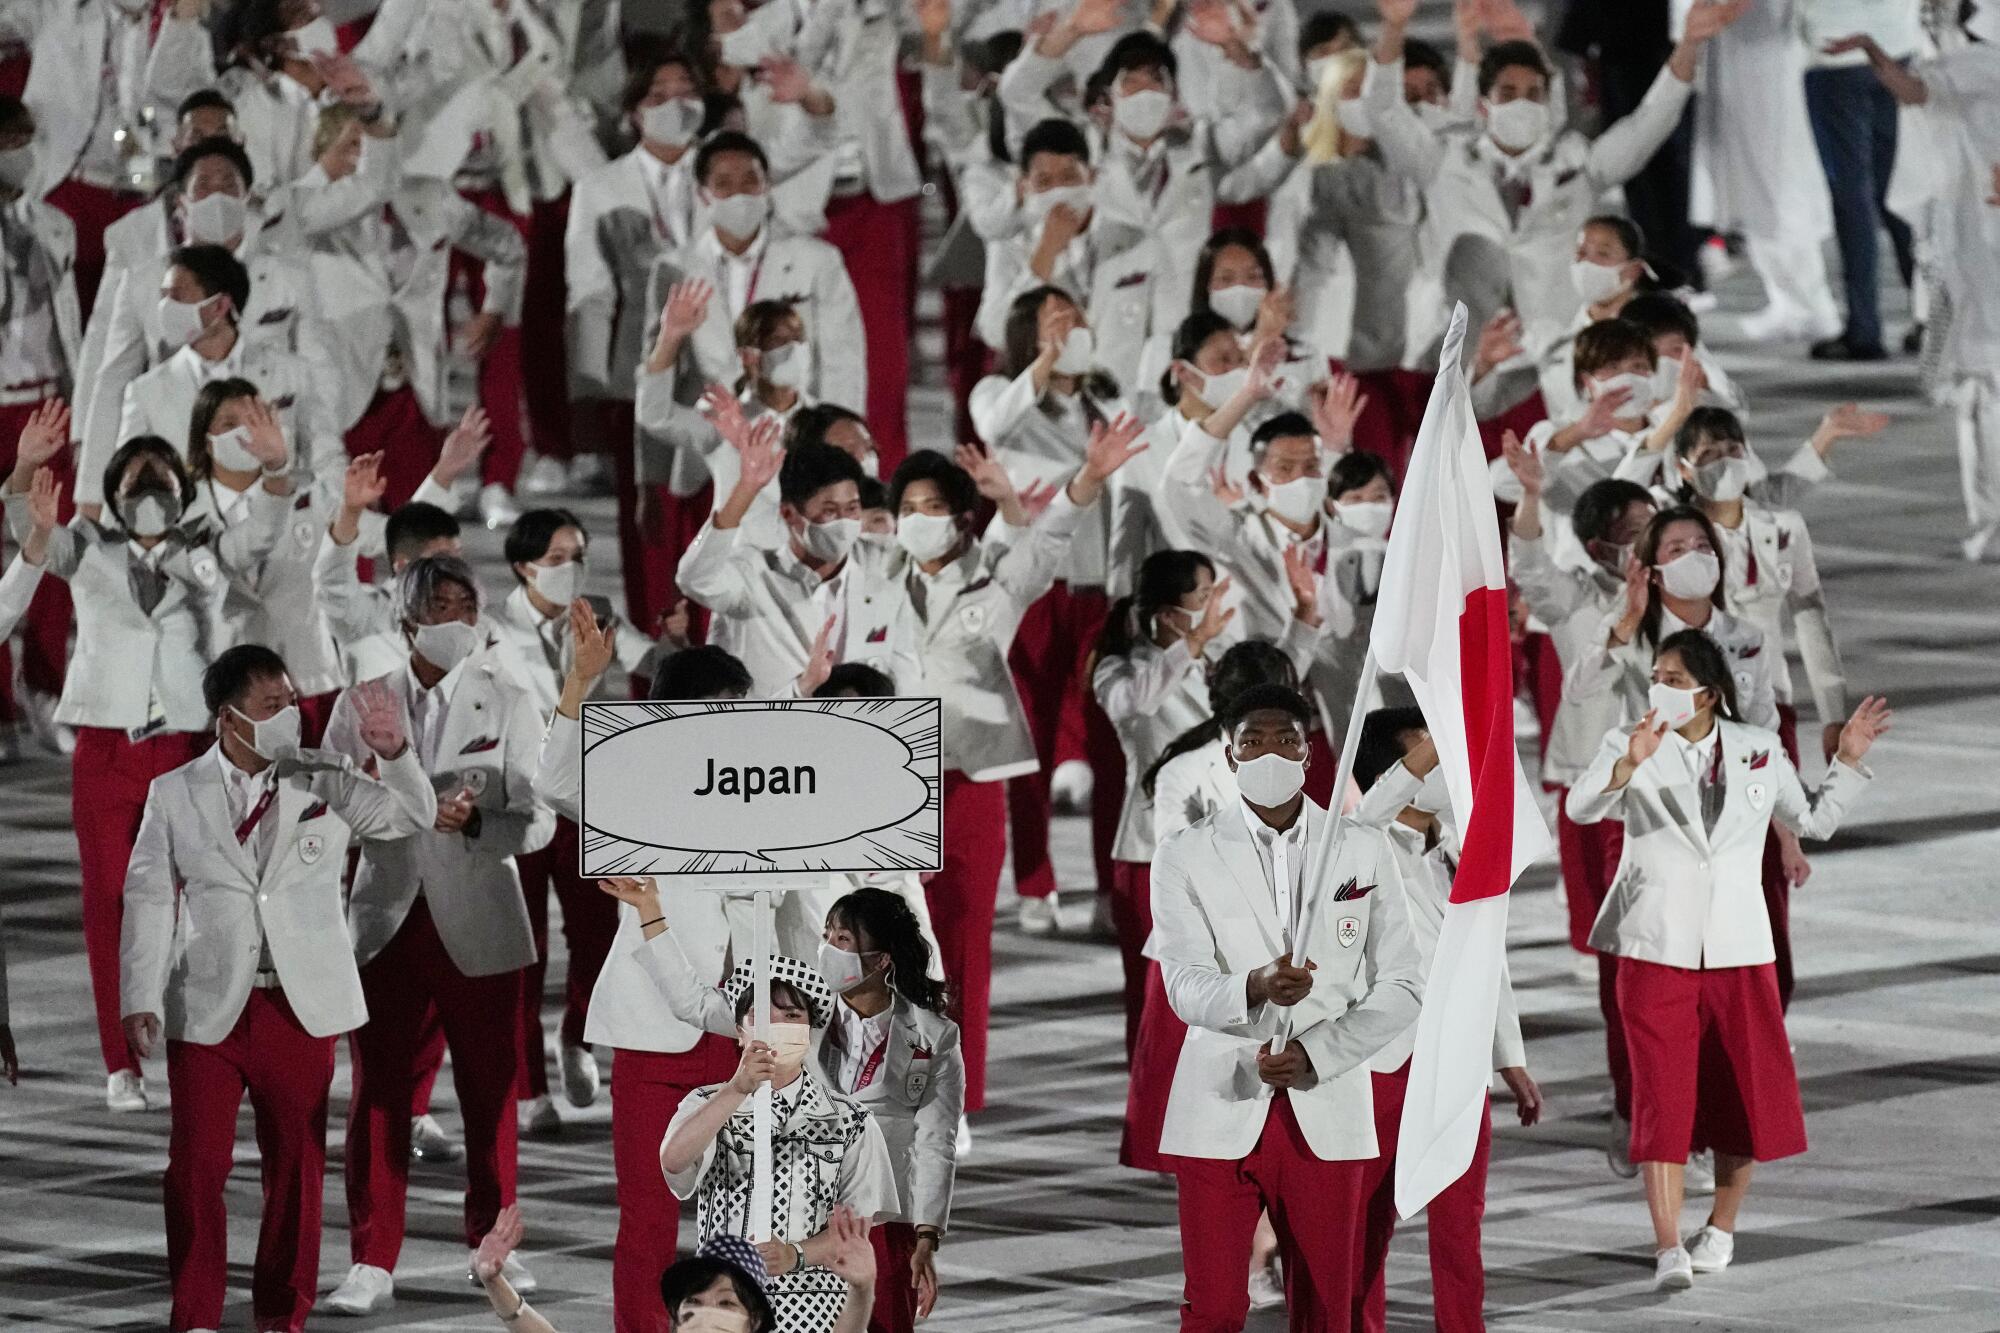 Yui Susaki and Rui Hachimura, of Japan, carry their country's flag during the opening ceremony